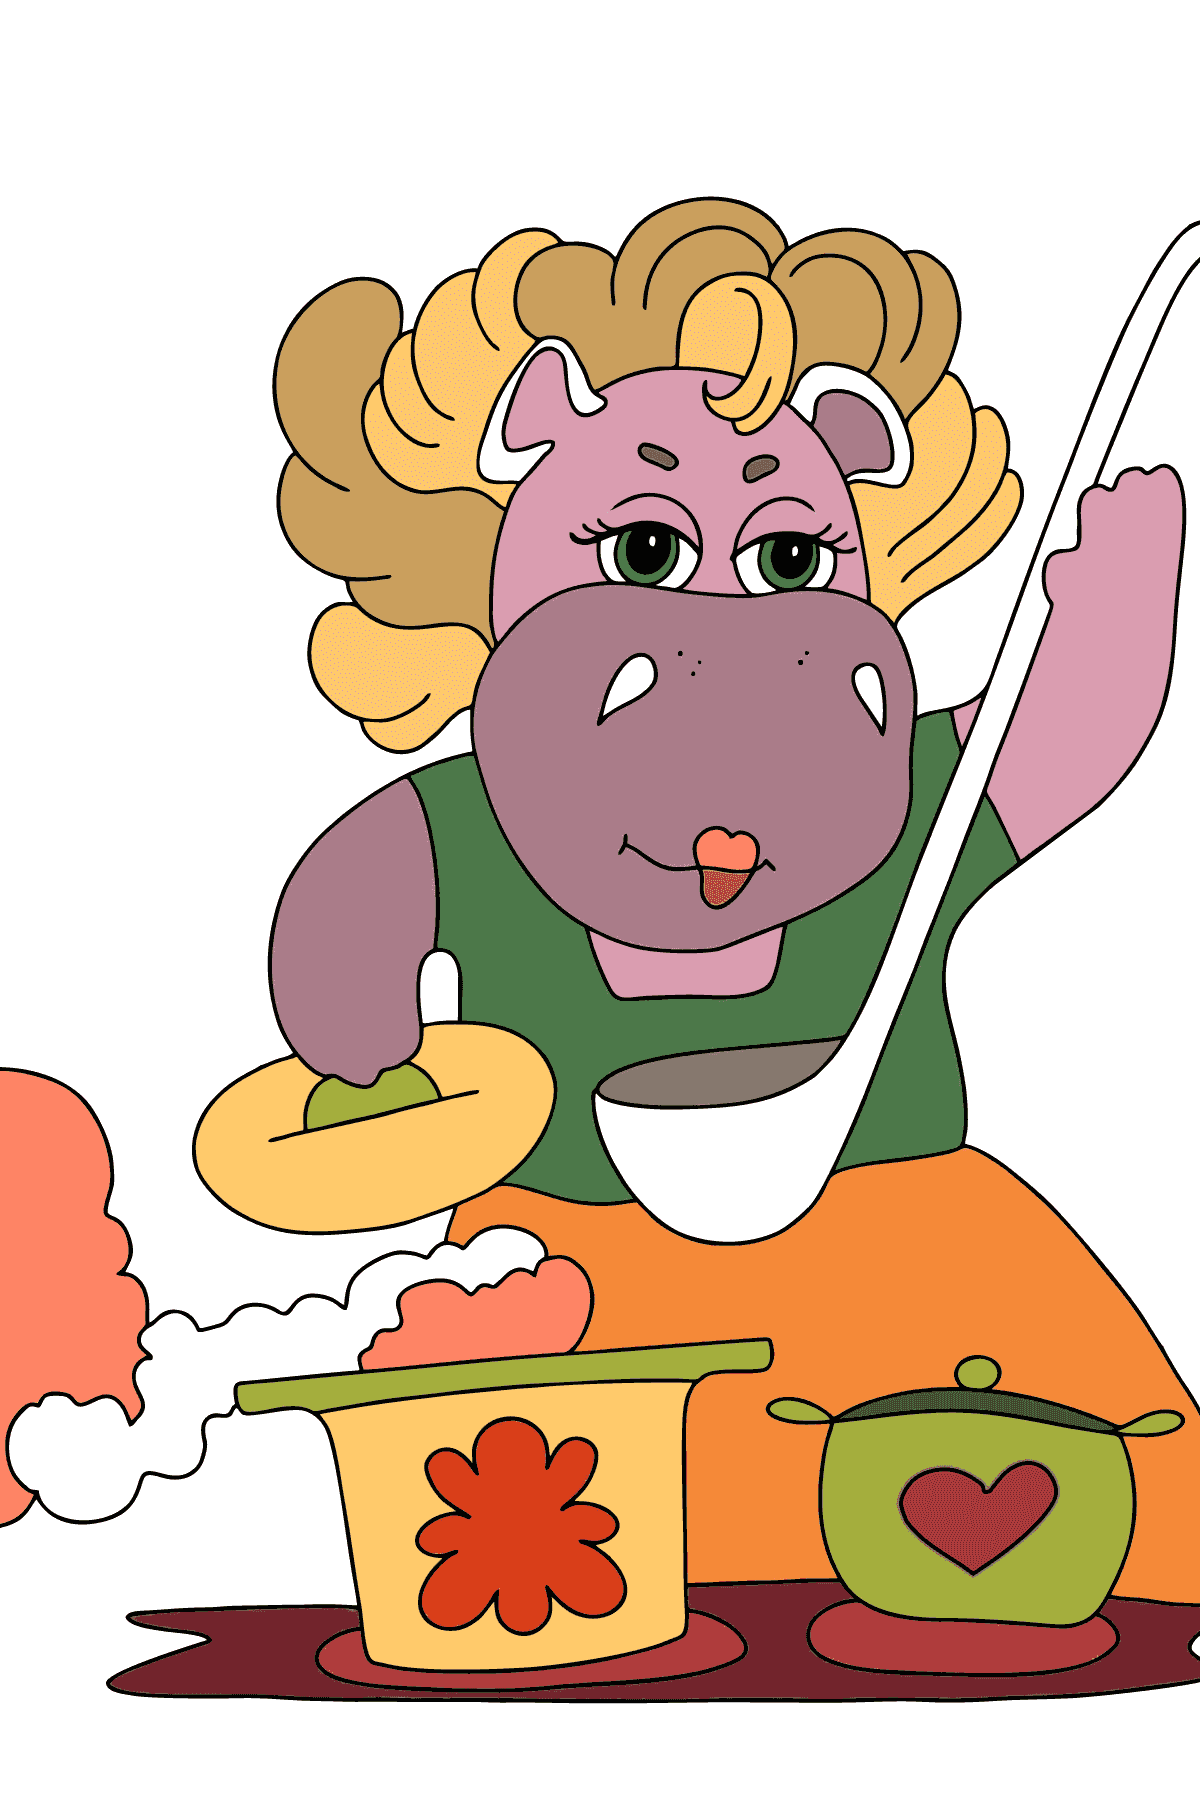 Magic Hippo coloring page - Coloring Pages for Kids